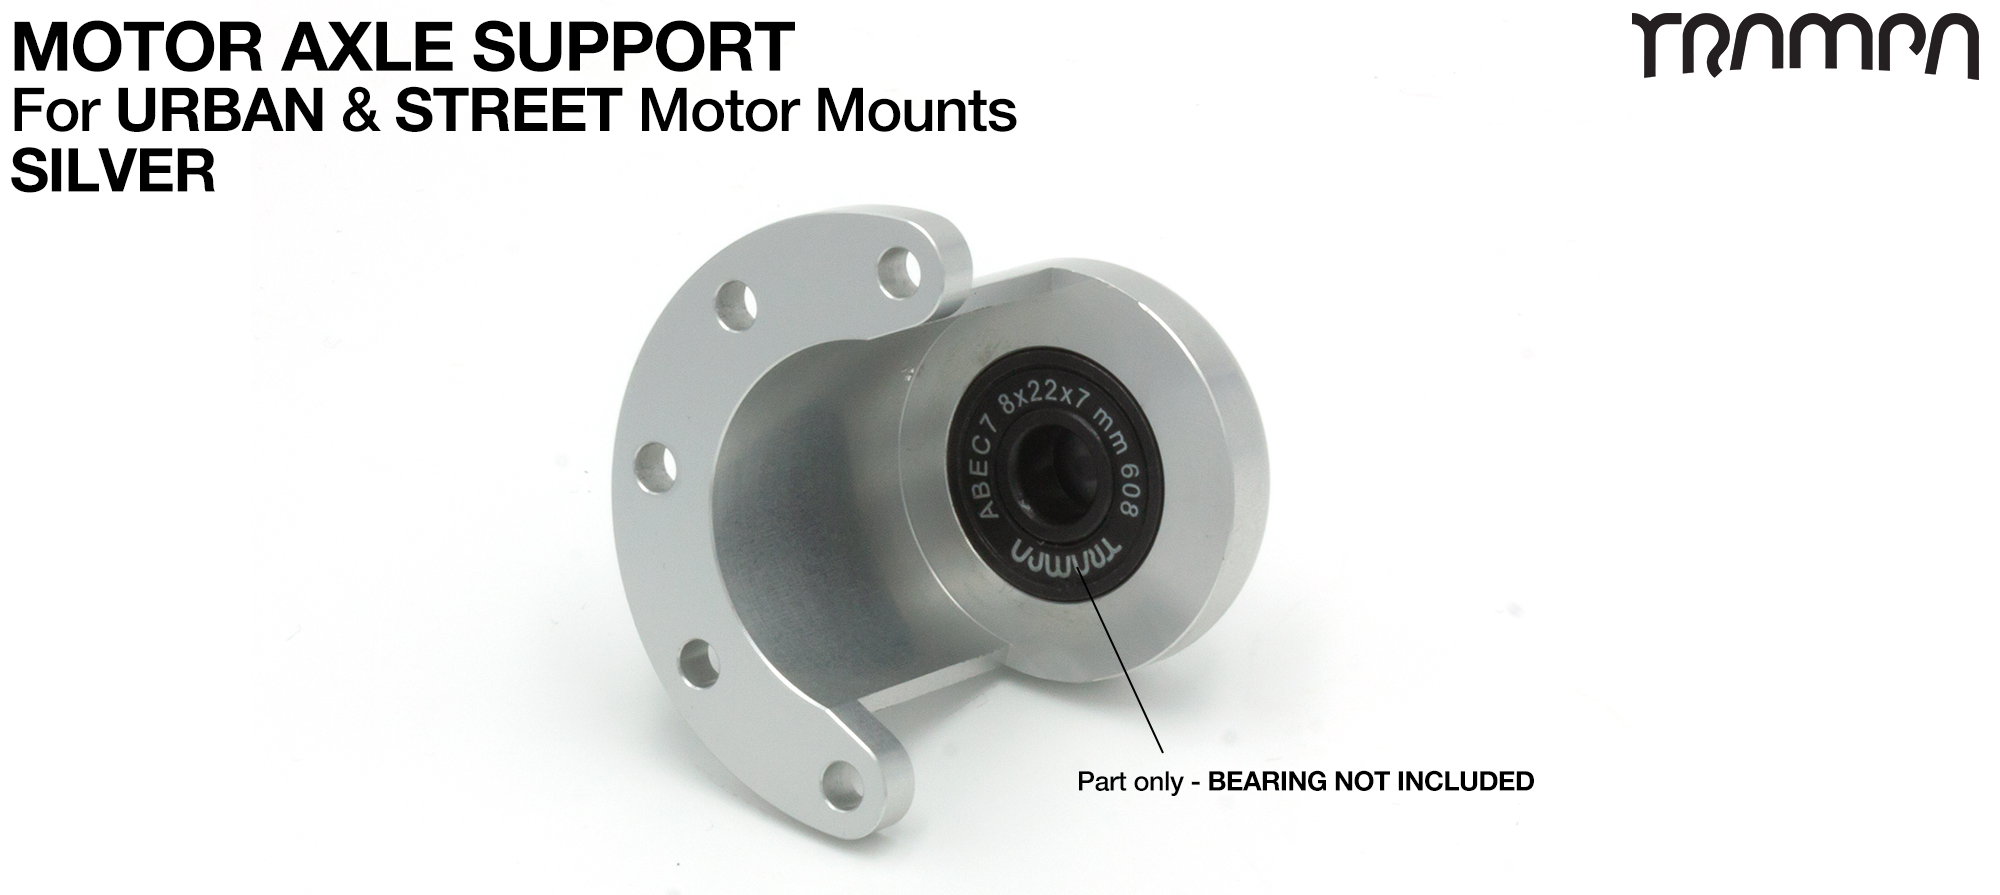 Motor Axle Support for Spring Truck Motor Mounts UNIVERSAL - SILVER